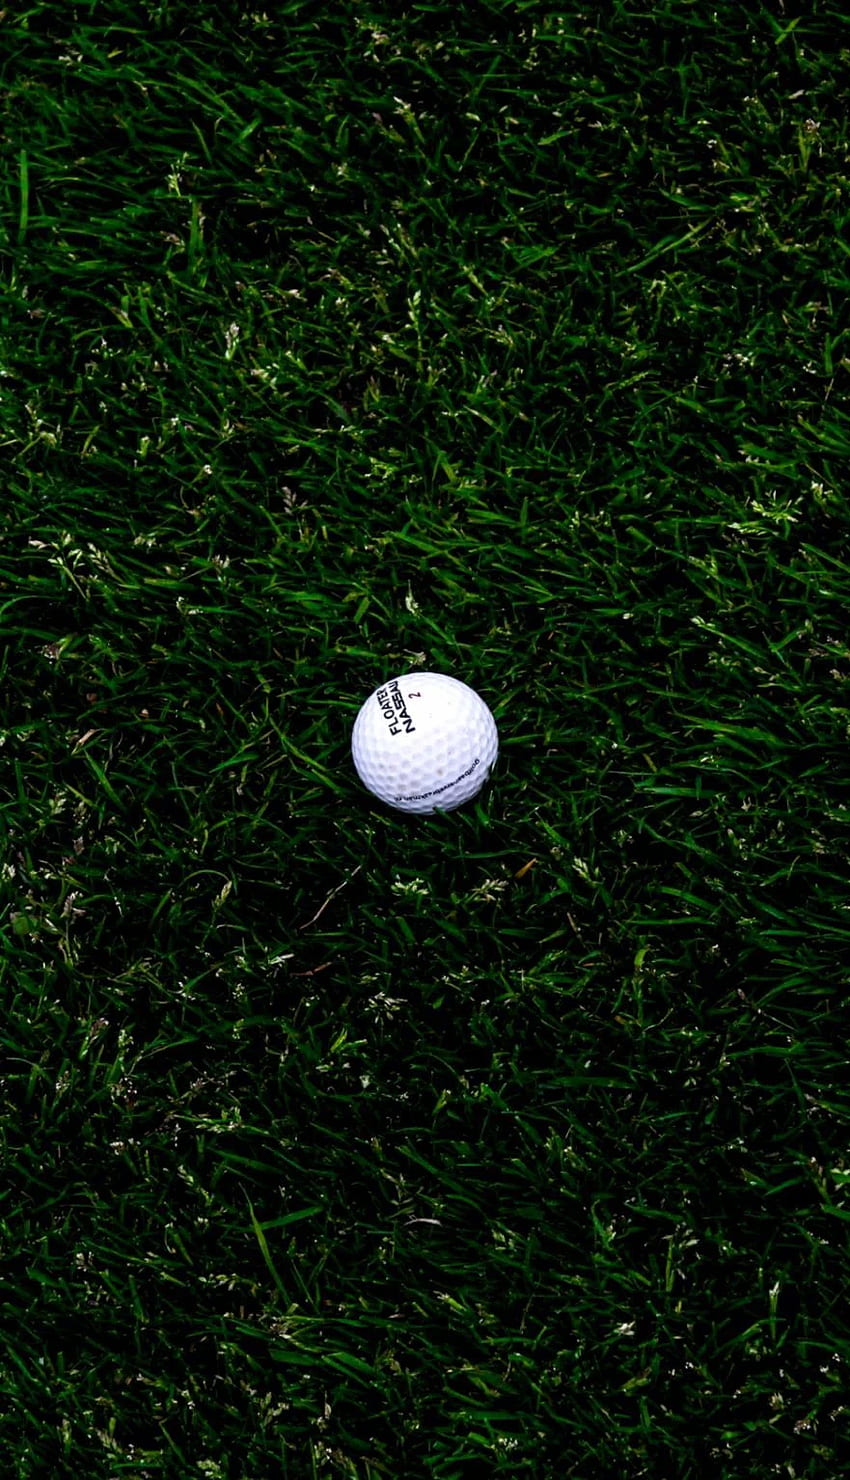 Golf iPhone 4s Wallpaper Download  iPhone Wallpapers iPad wallpapers  Onestop Download  Golf Golf ball Golf pictures